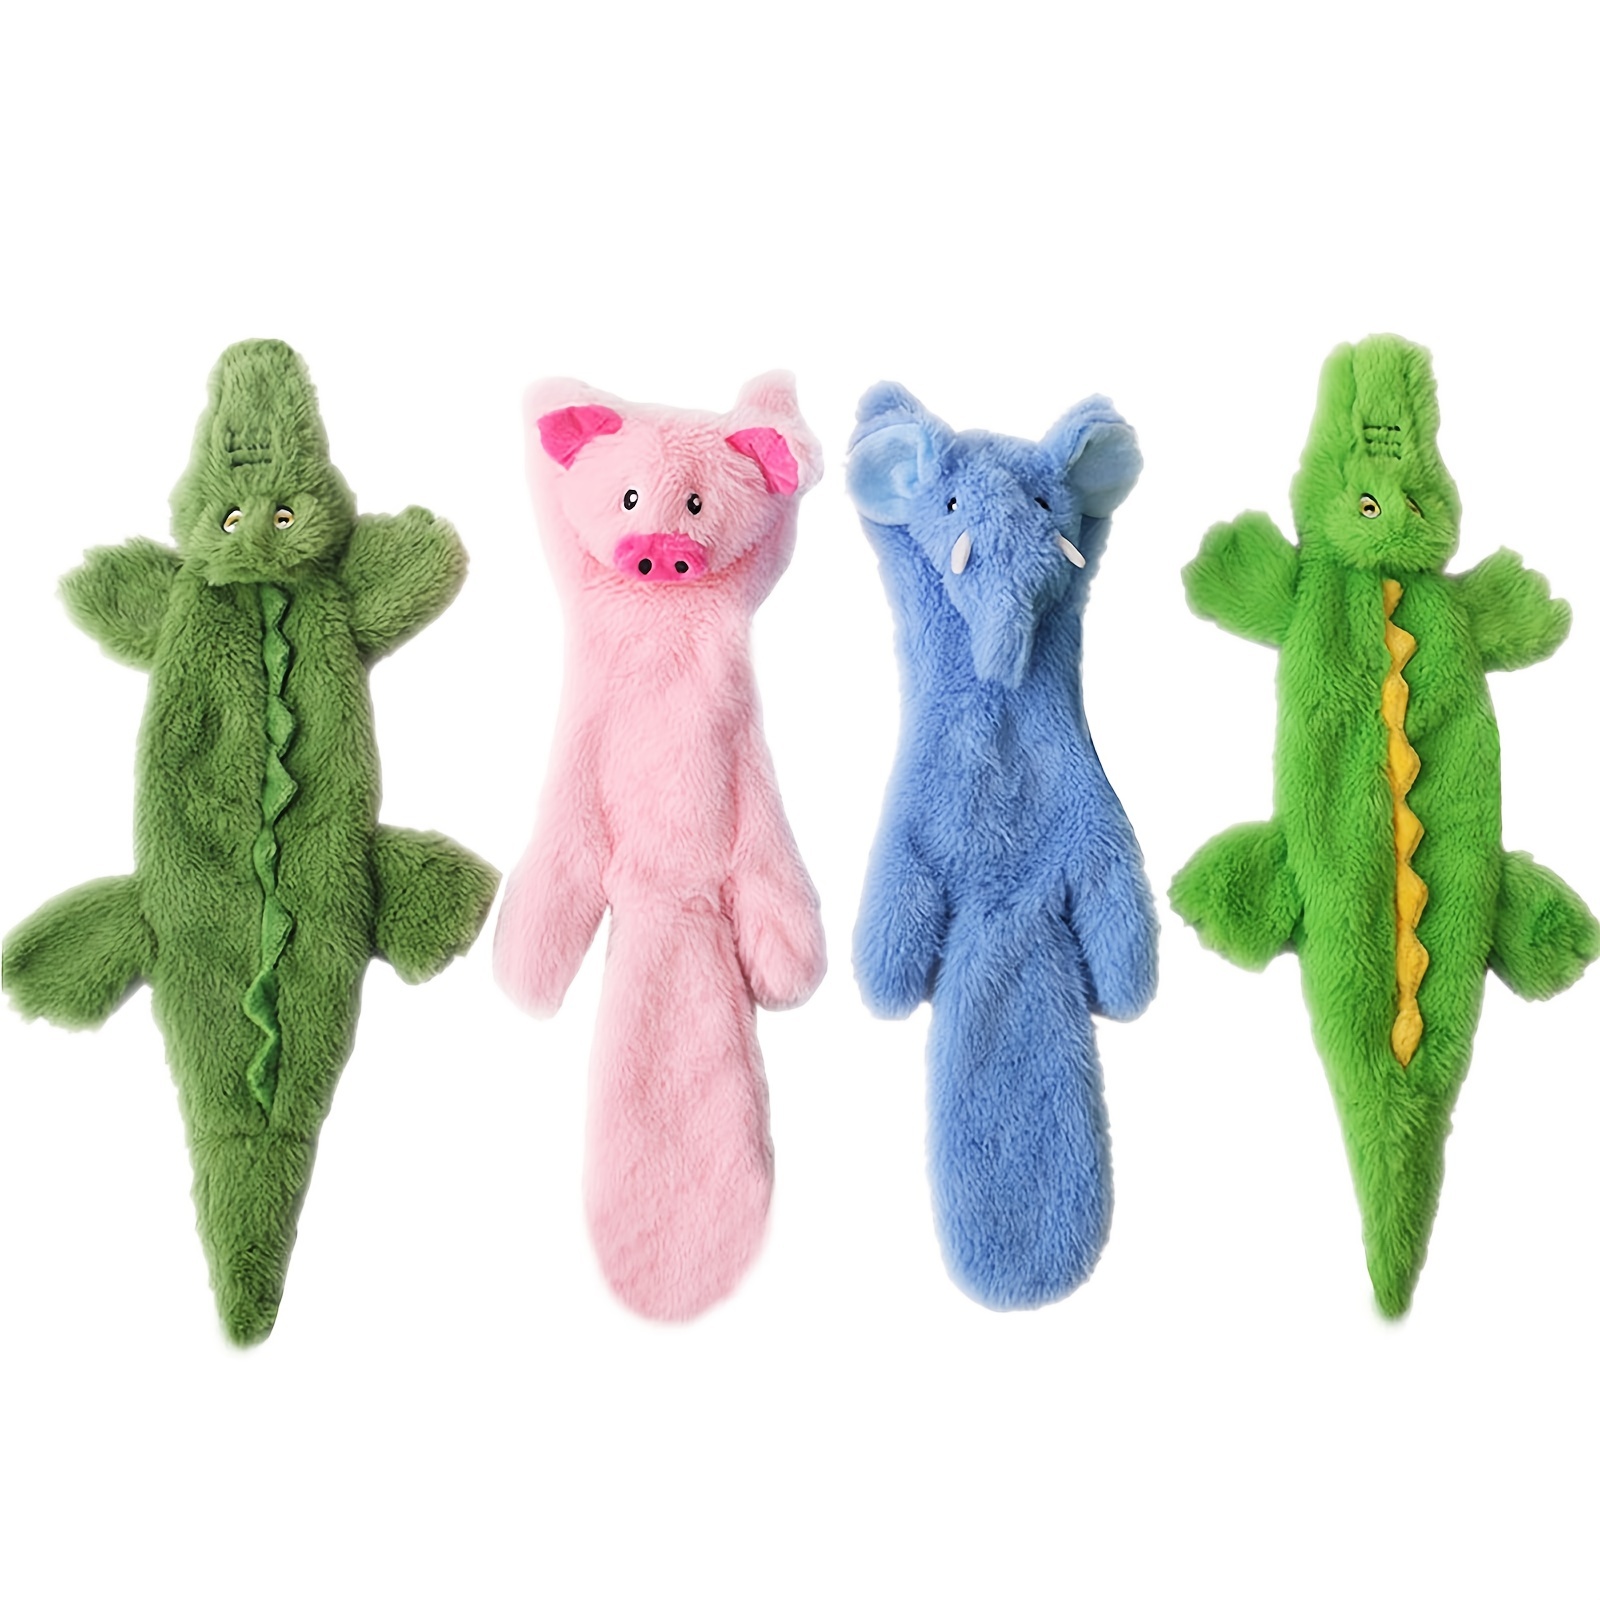 Stuffed Dog Toys for Large Dogs - Big Dog Squeaky Toys, Plush Dog Toys for  Boredom and Stimulating, Cute Stuffing Lizards with Soft Squeaker, Fun